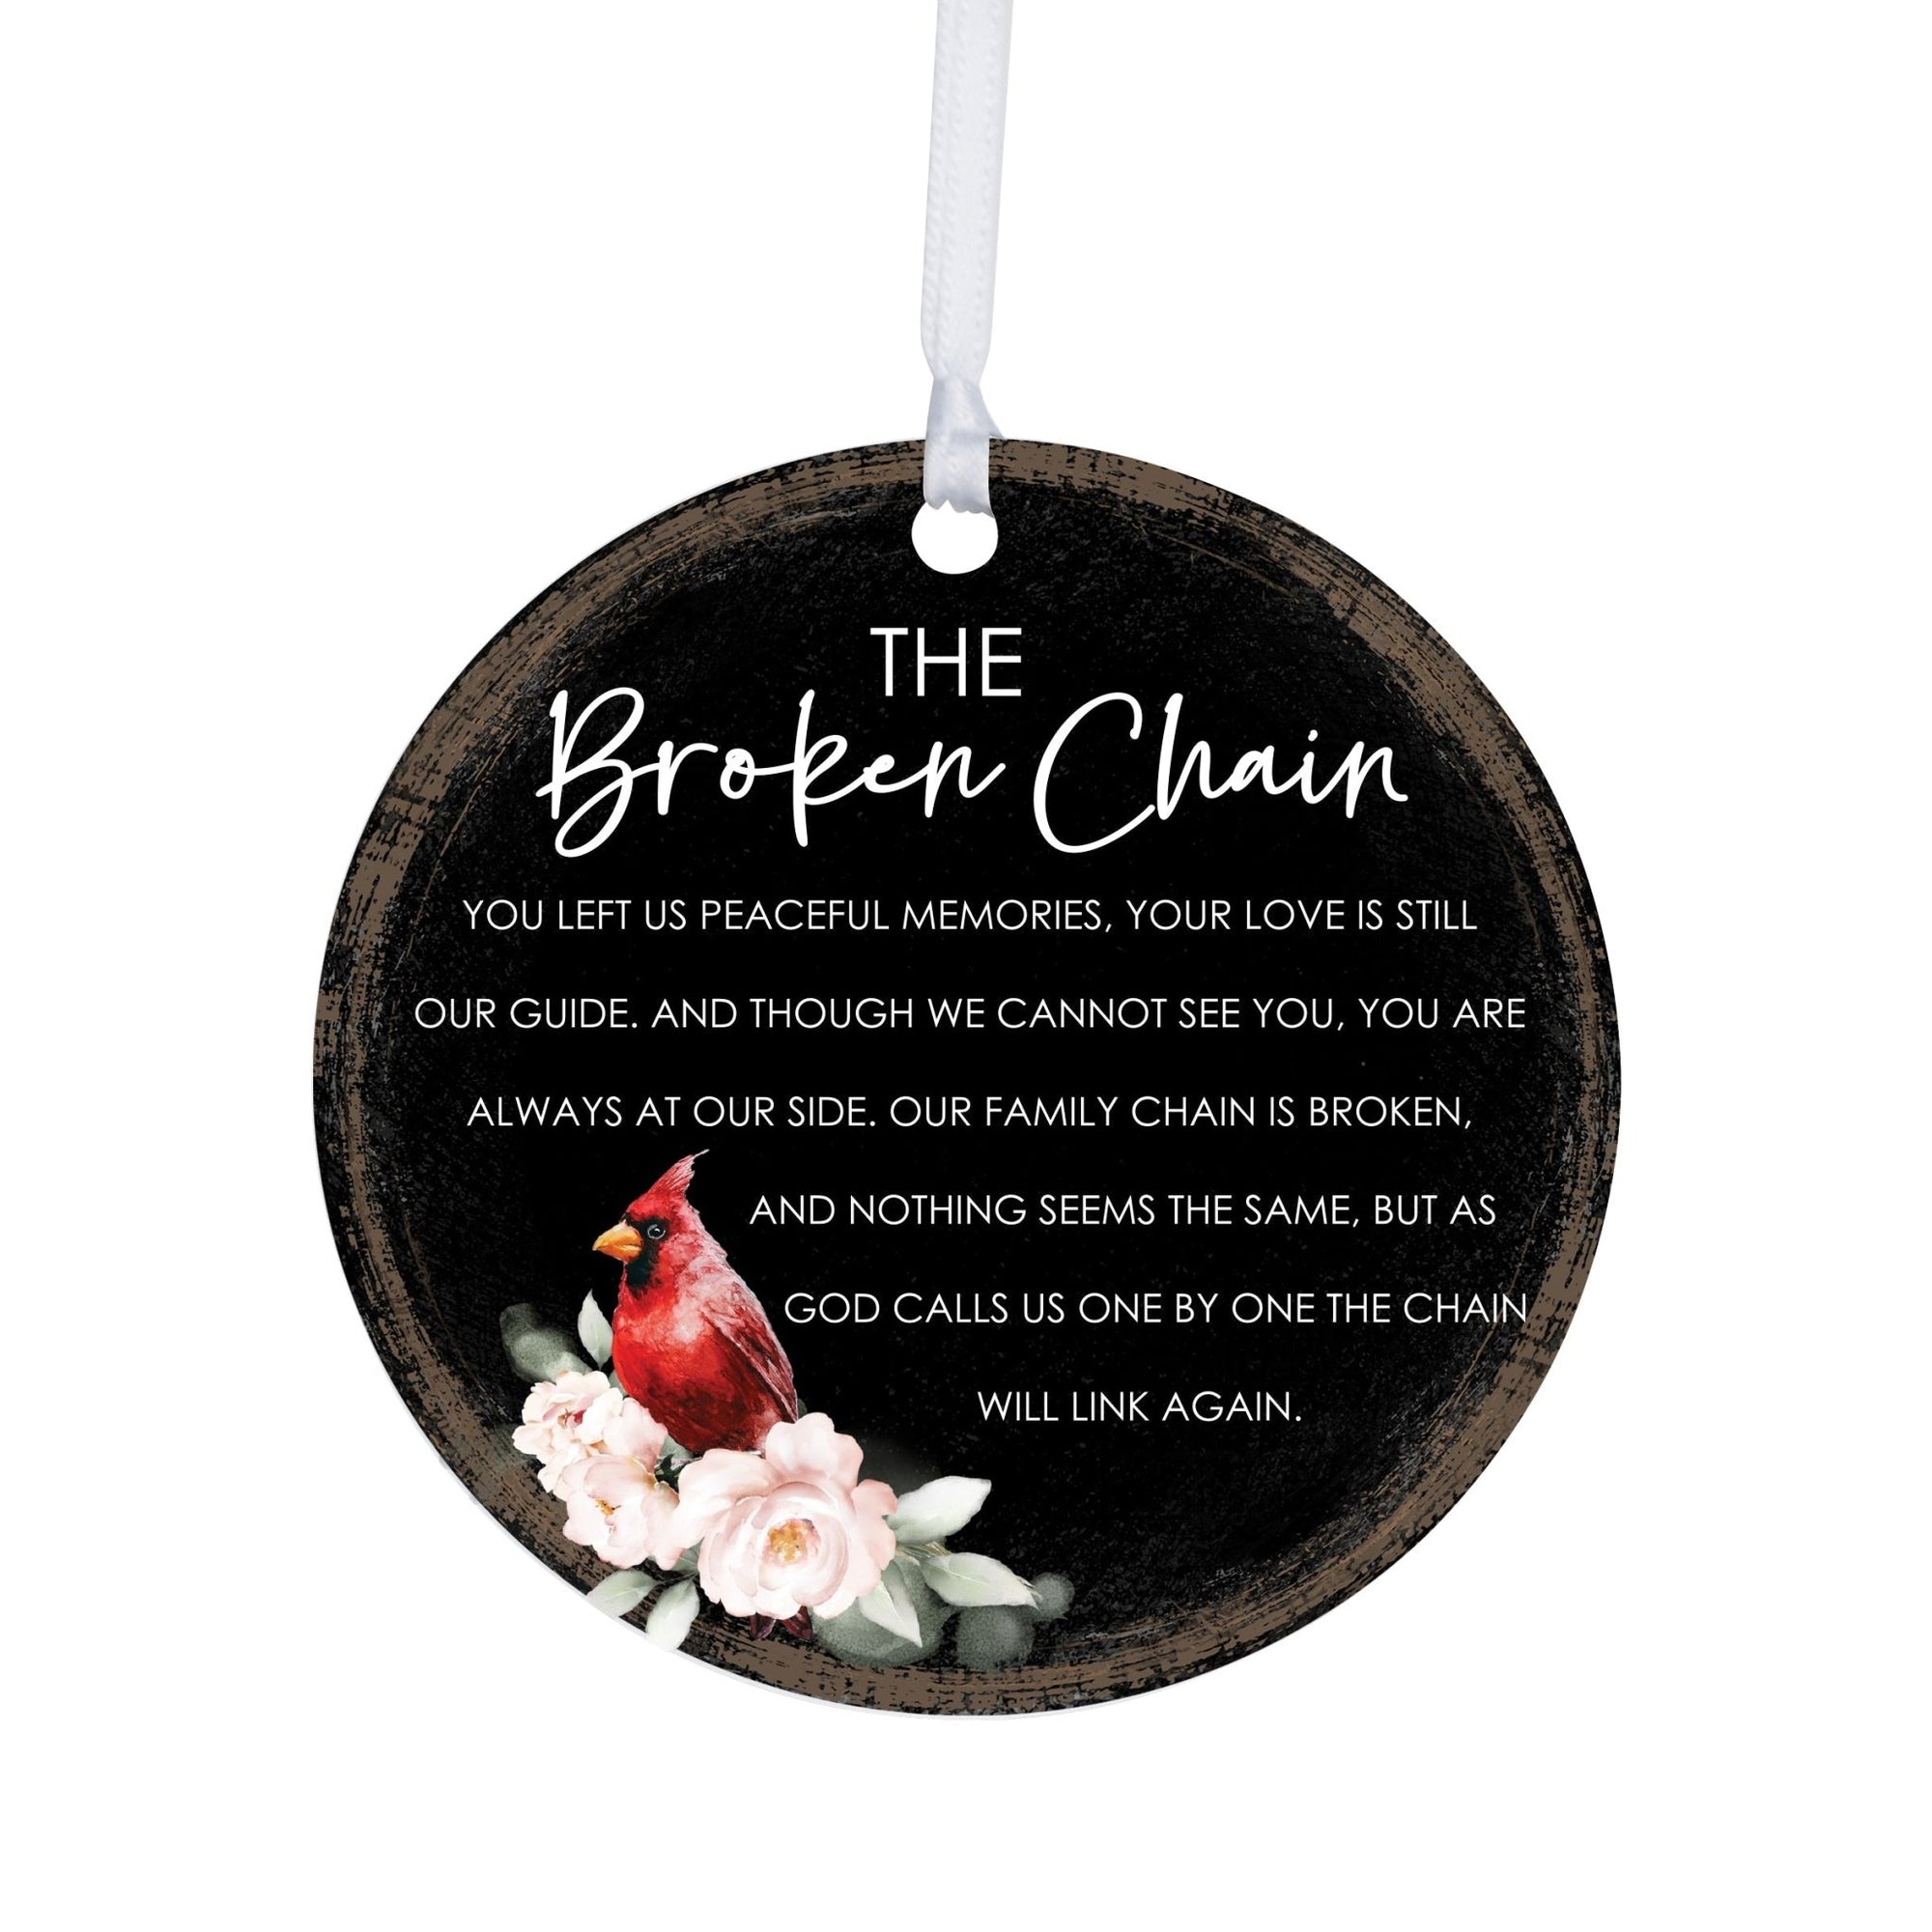 Graceful bereavement ornament adorned with meaningful symbols and a heartfelt message.